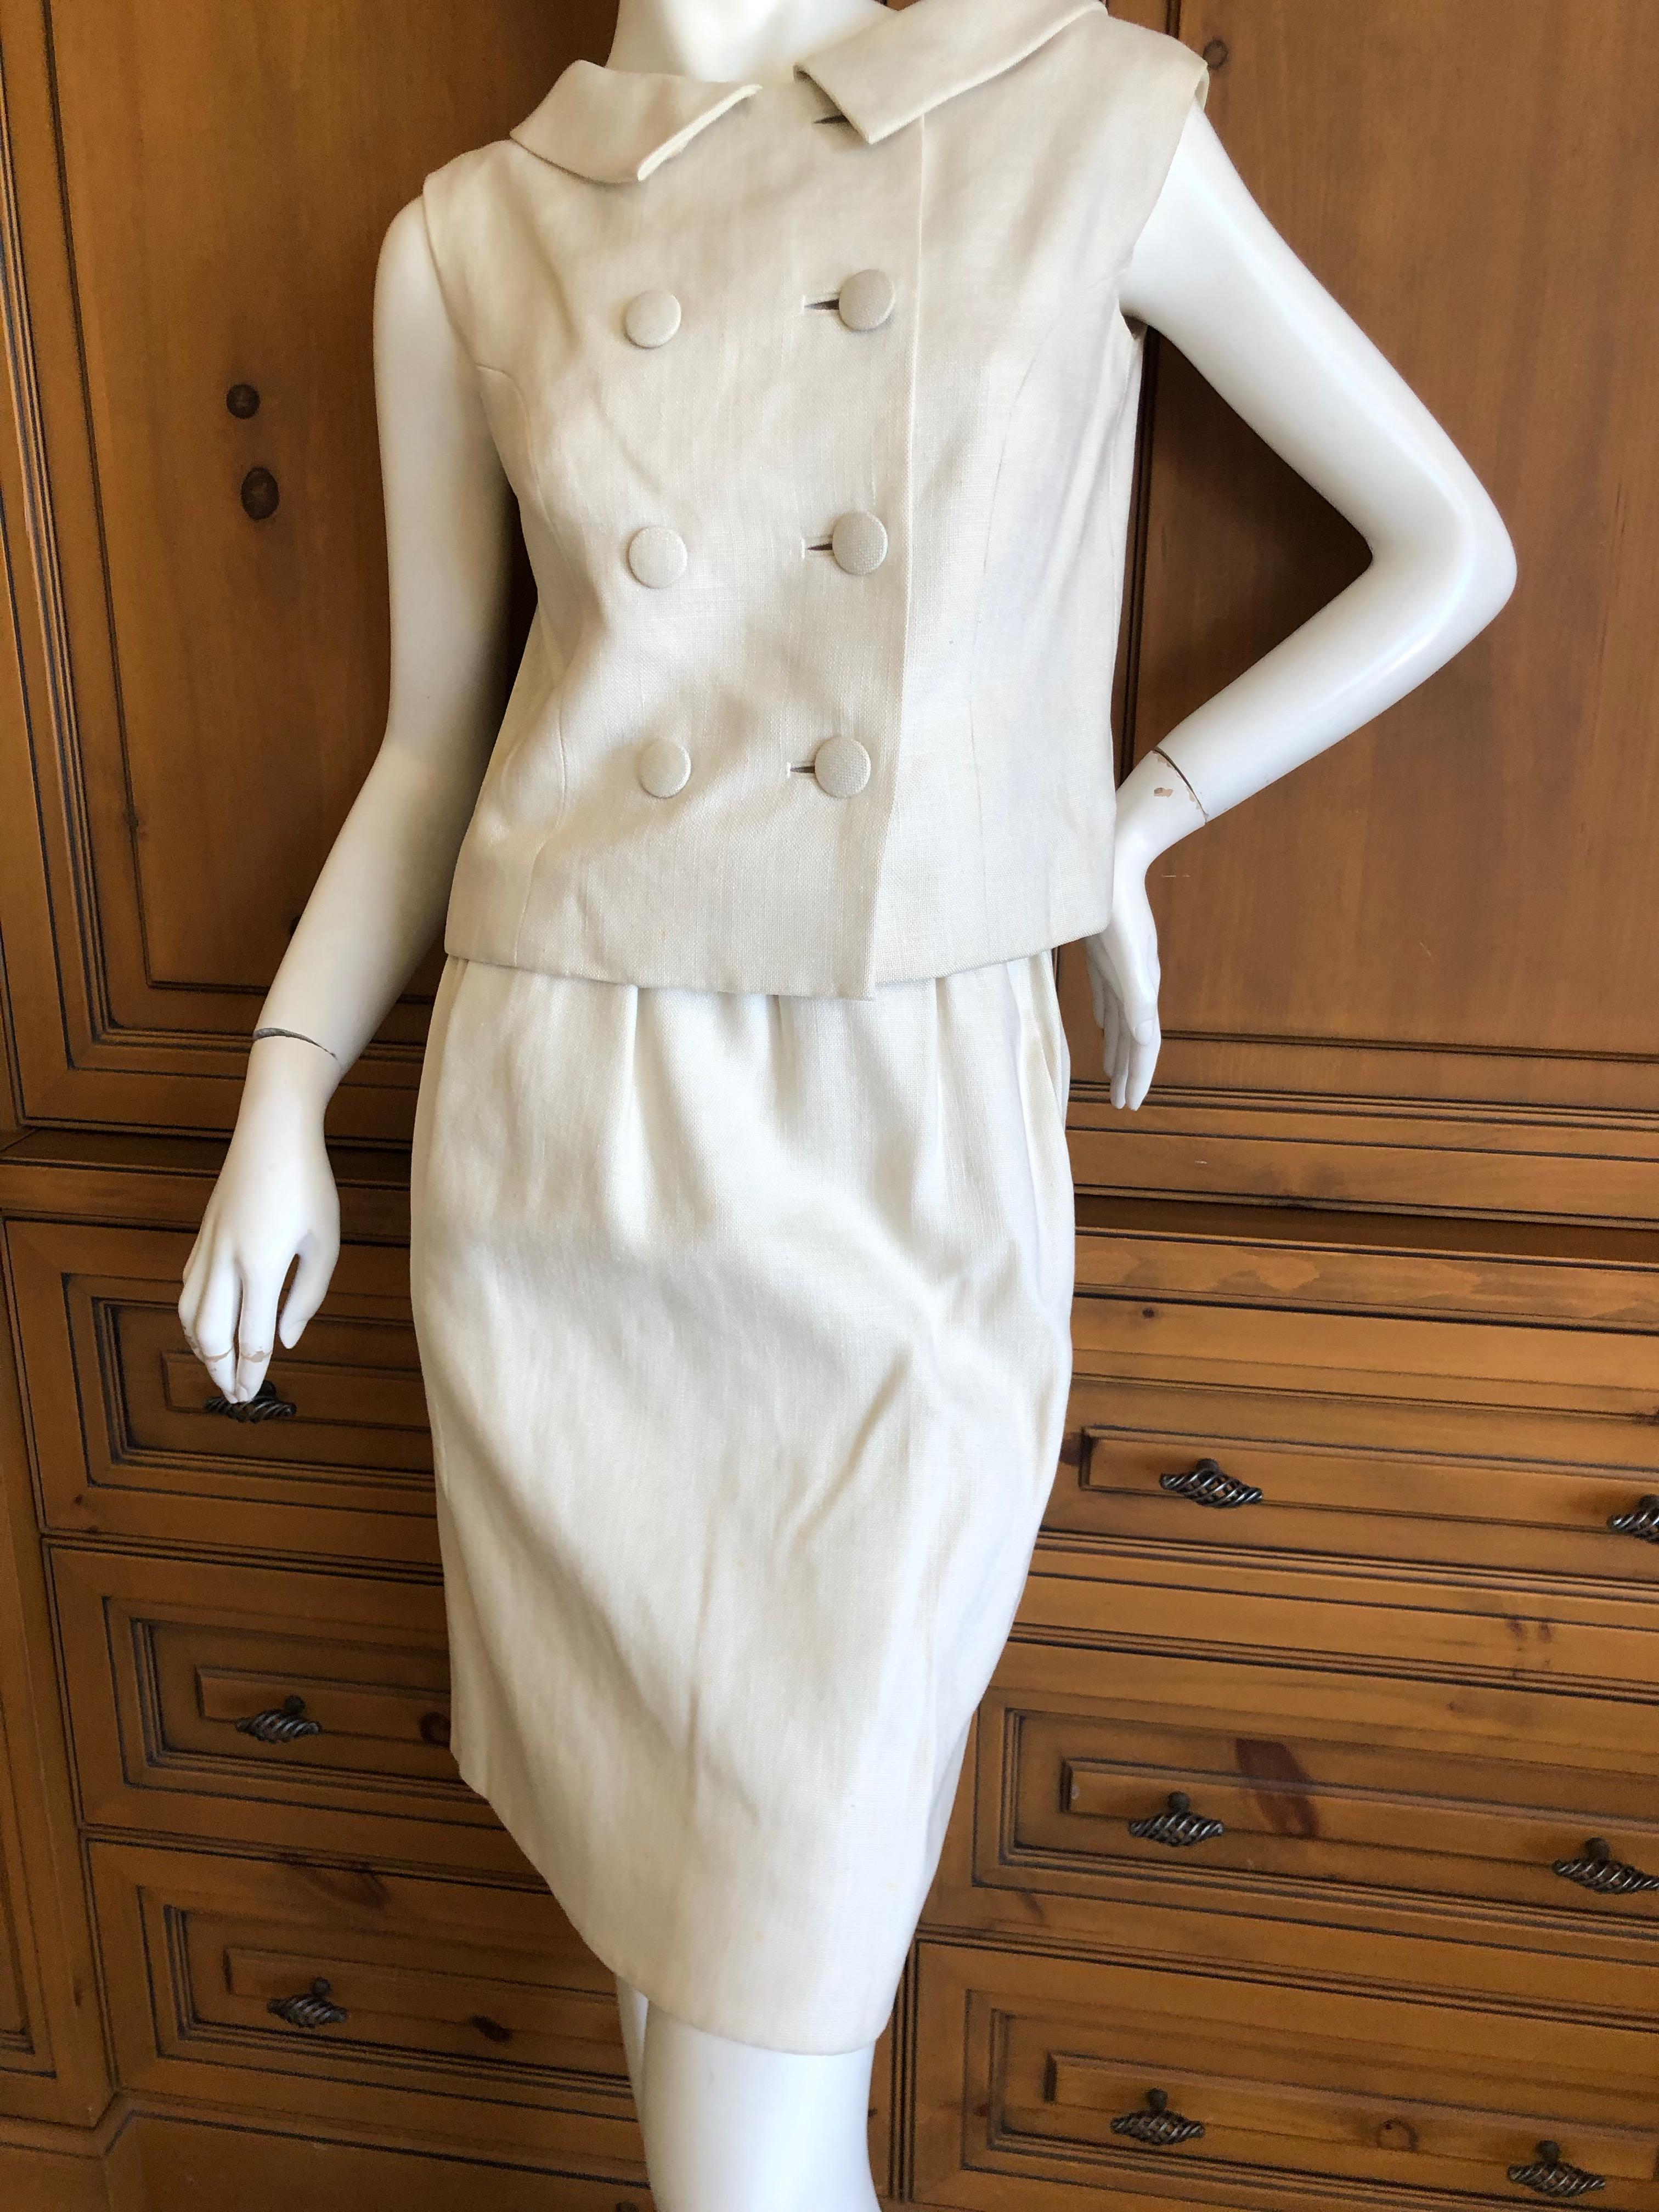 Beautiful skirt suit from Norman Norell.
Lined in silk Taffeta.
In Excellent condition
Top
Bust 36